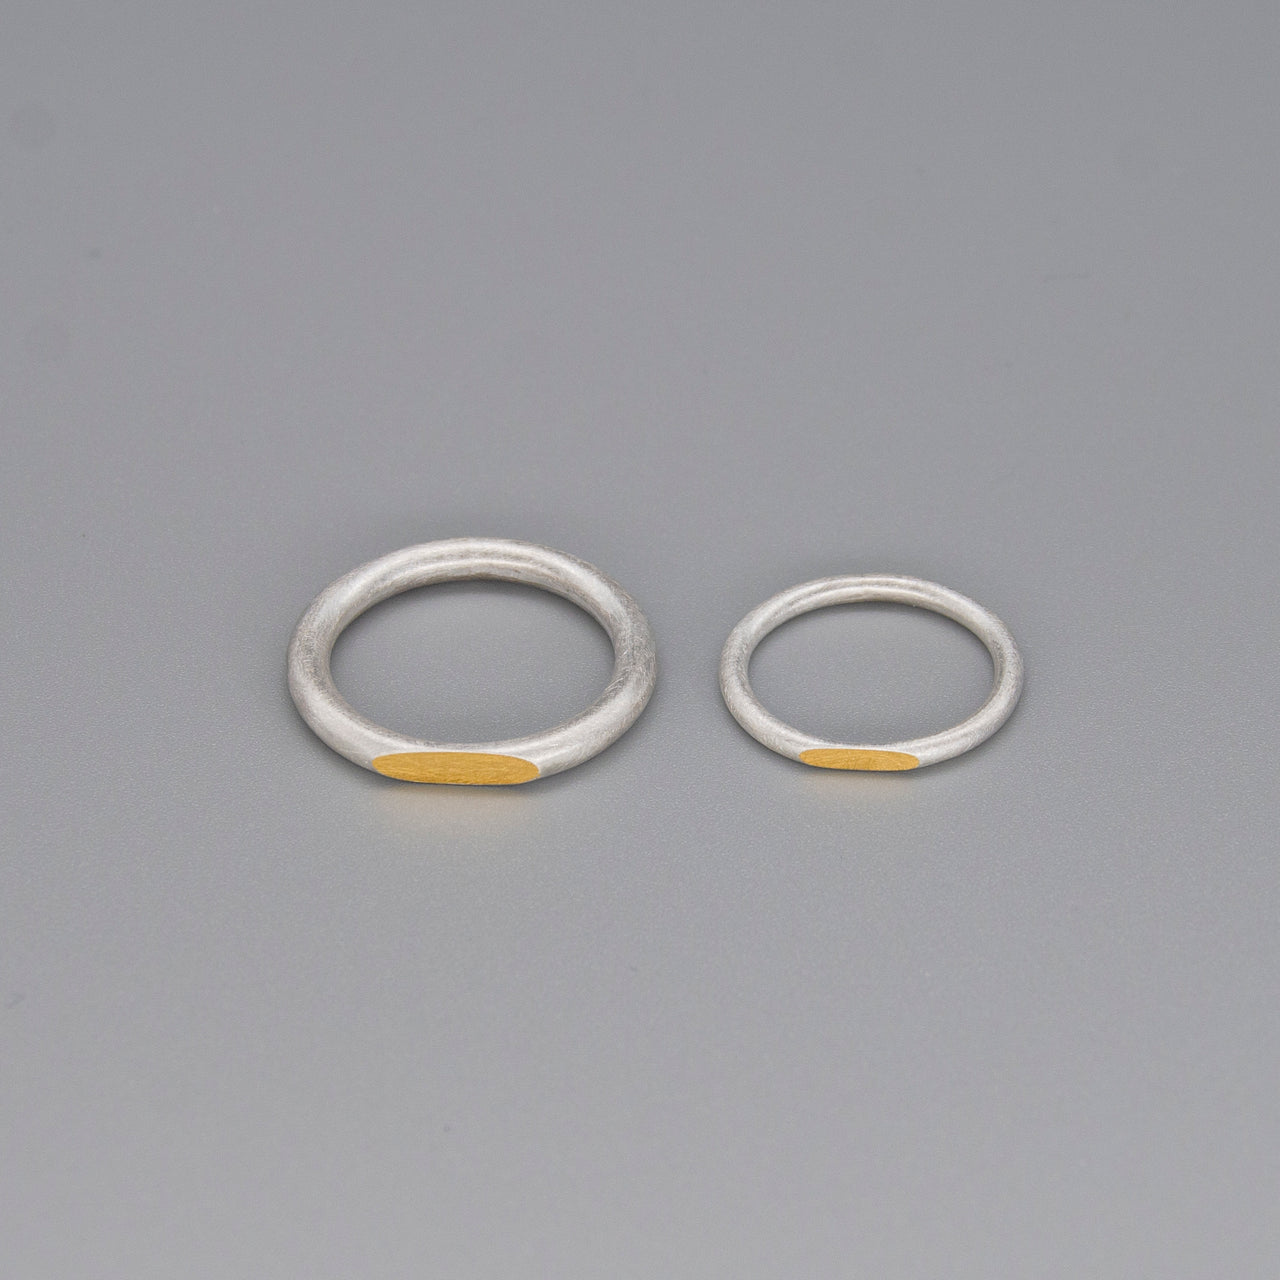 One on Another Silver Ring - 3mm